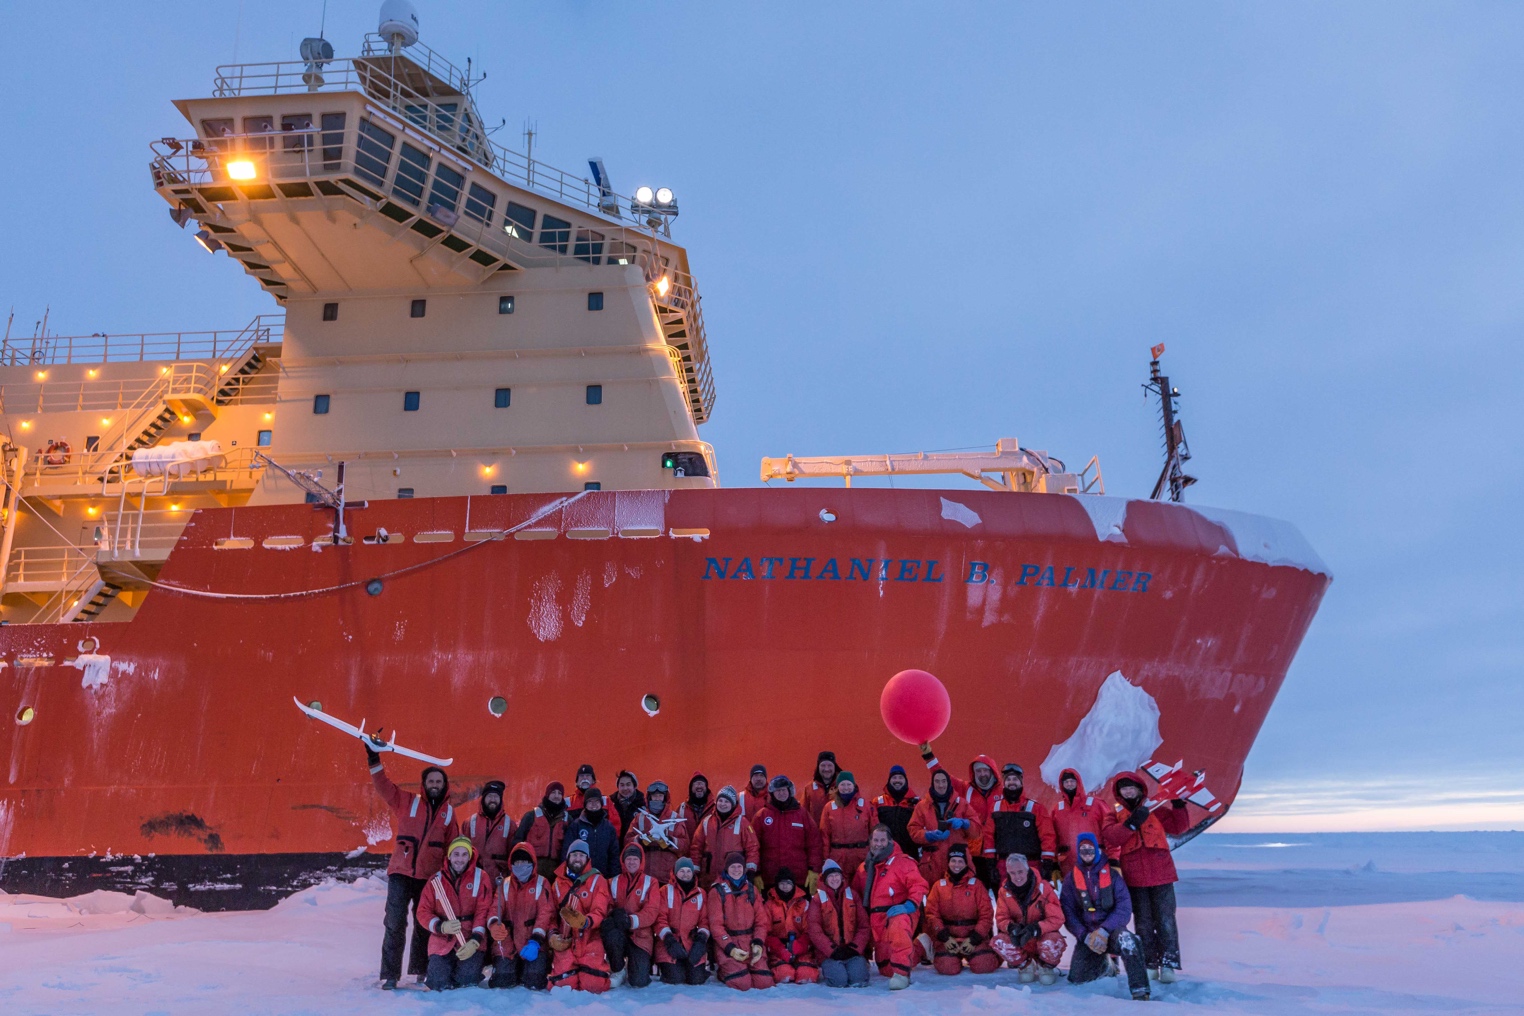 PIPERS science party in front of the R/V Nathaniel B. Palmer. Photo credit: NBP1705 PIPERS Science Support Team